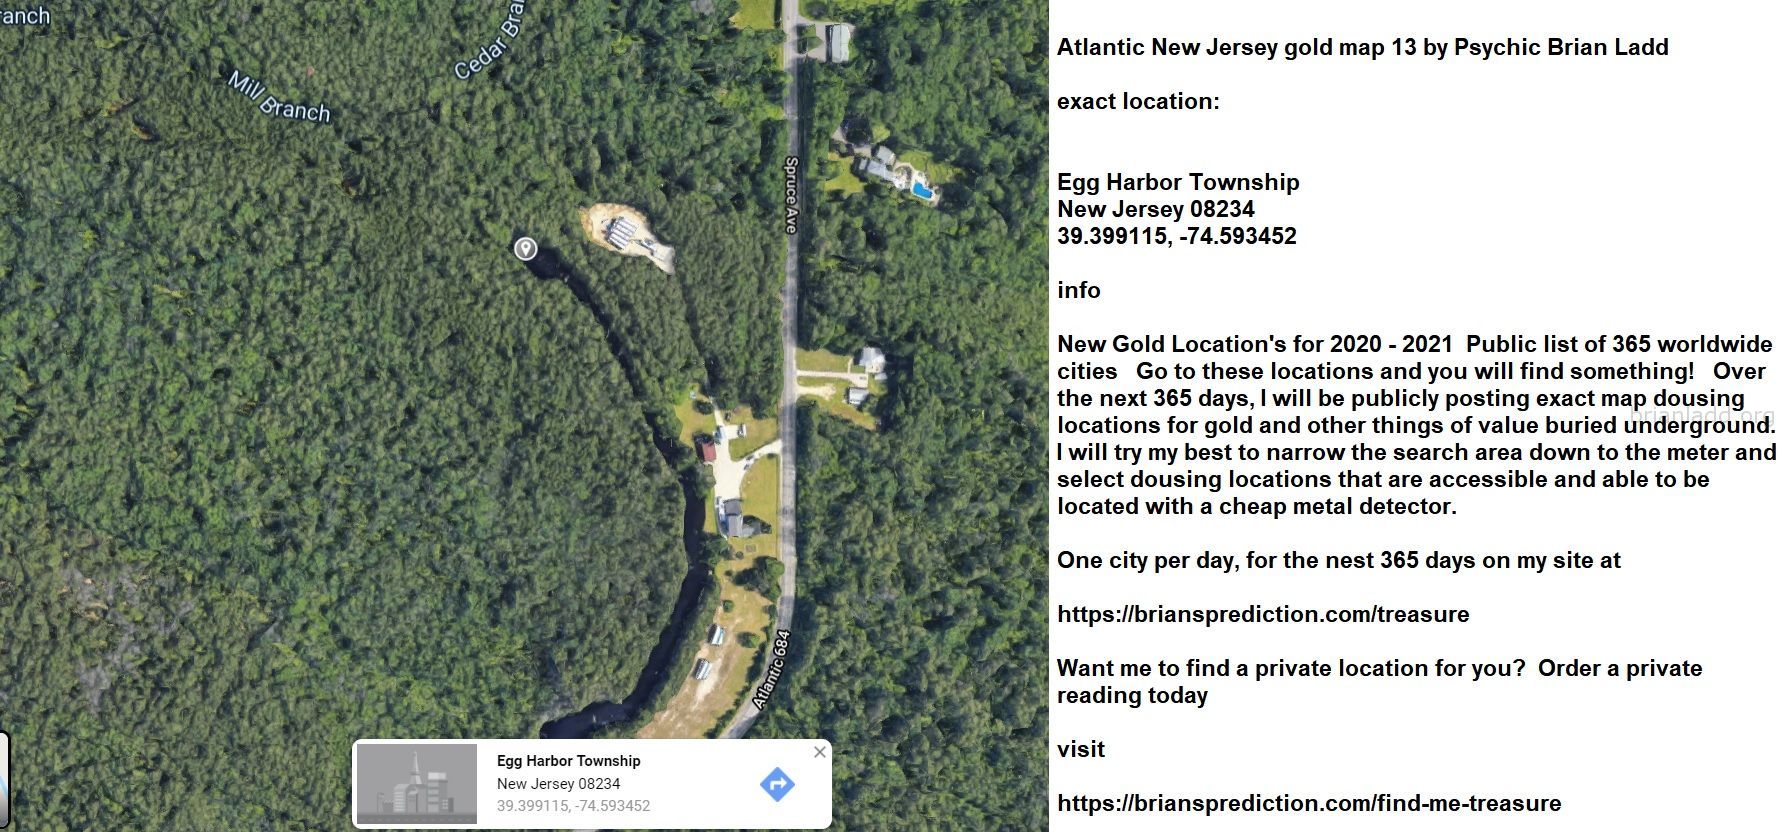 Atlantic New Jersey Gold Map 13 By Psychic Brian Ladd - Atlantic New Jersey Gold Map 13 By Psychic Brian Ladd  Exact Loc...
Atlantic New Jersey Gold Map 13 By Psychic Brian Ladd  Exact Location:  Egg Harbor Township  New Jersey 08234  39.399115, -74.593452  Info  New Gold Location'S For 2020 - 2021  Public List Of 365 Worldwide Cities  Go To These Locations And You Will Find Something!  Over The Next 365 Days, I Will Be Publicly Posting Exact Map Dousing Locations For Gold And Other Things Of Value Buried Underground.  I Will Try My Best To Narrow The Search Area Down To The Meter And Select Dousing Locations That Are Accessible And Able To Be Located With A Cheap Metal Detector.  One City Per Day, For The Nest 365 Days On My Site At   https://briansprediction.com/Treasure  Want Me To Find A Private Location For You?  Order A Private Reading Today  Visit   https://briansprediction.com/Find-Me-Treasure
